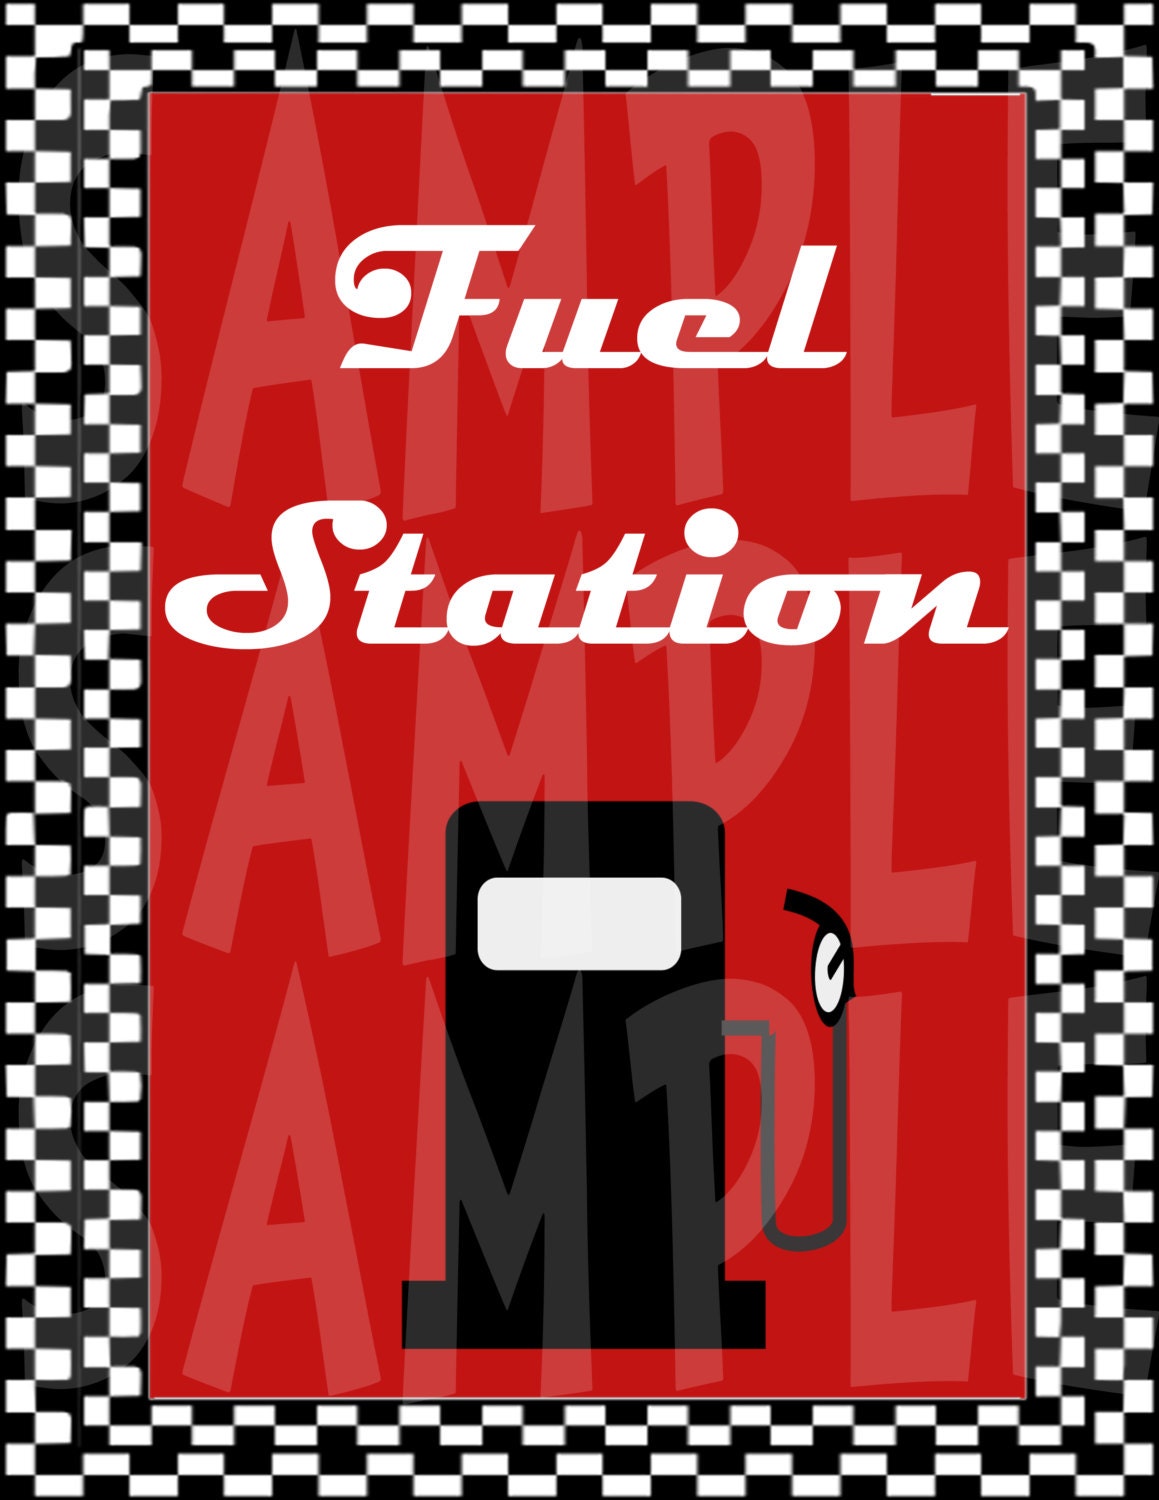 race-party-fuel-station-sign-8-5-x-11-sign-for-digital